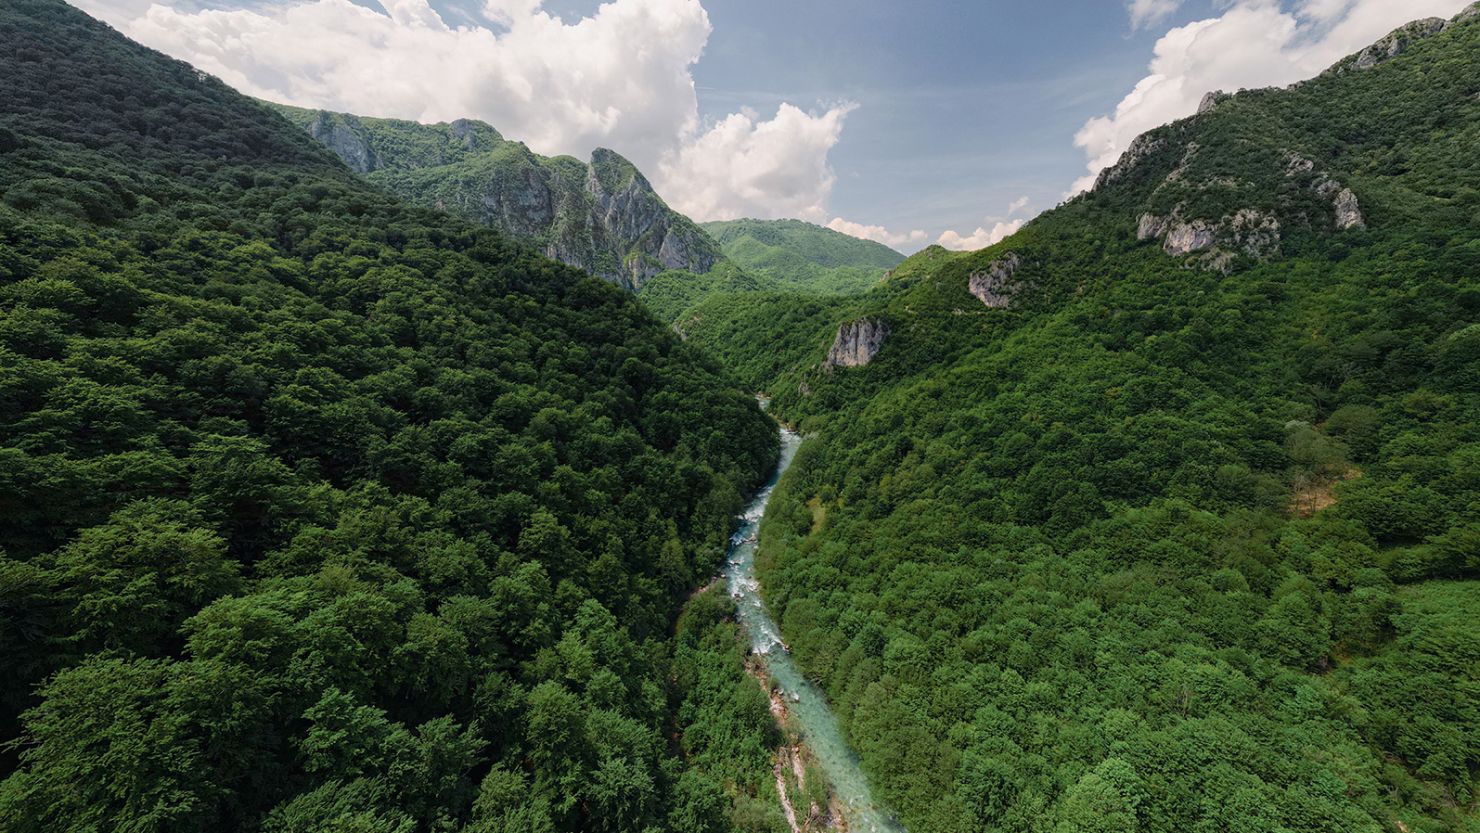 The Neretva River flows through densely forested gorges in central Bosnia and Herzegovina.